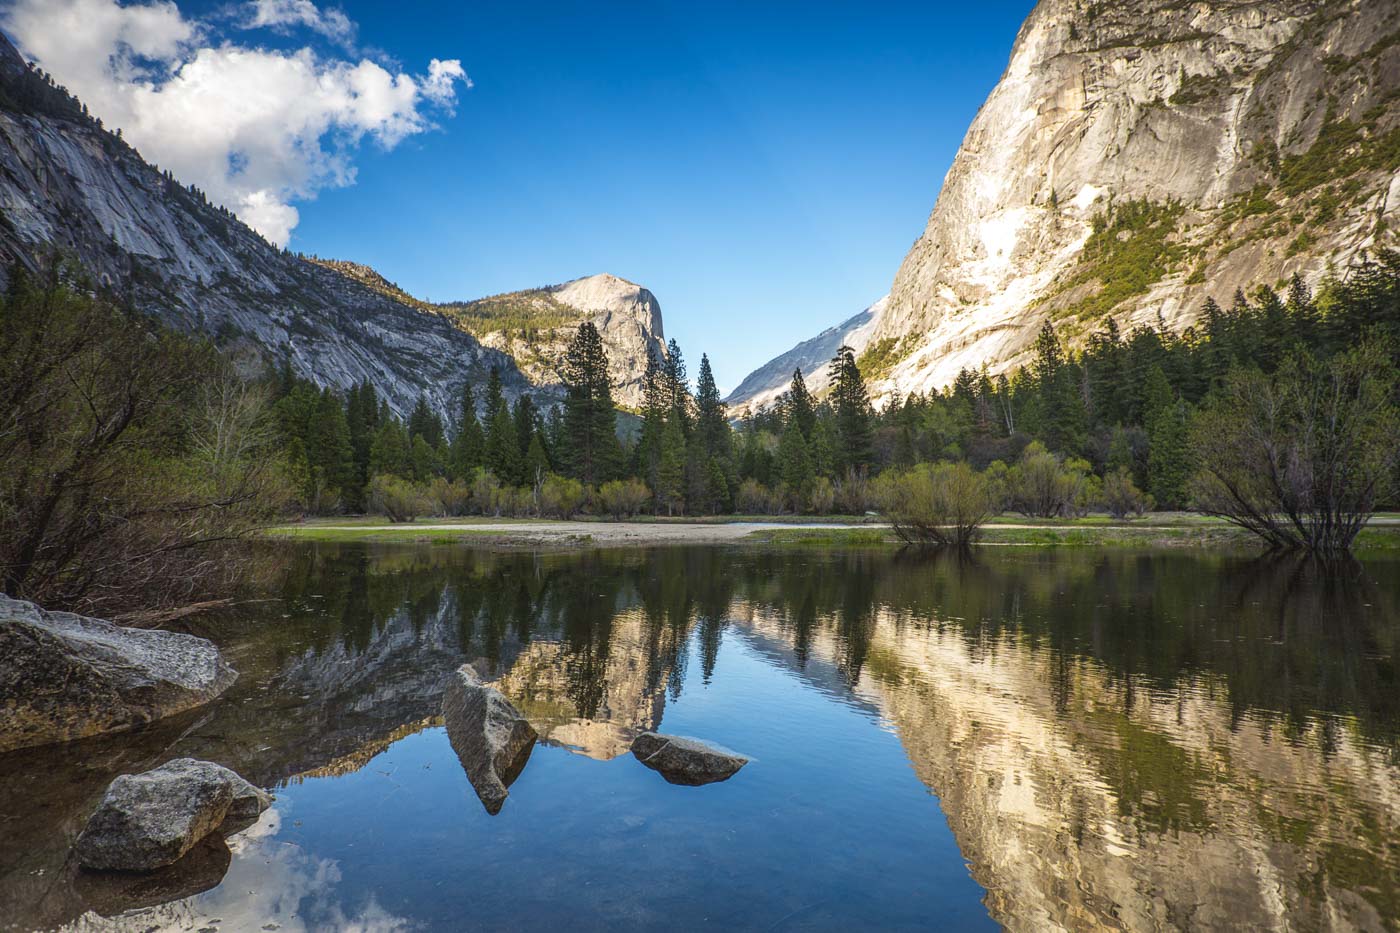 Reflections of Yosemite's mountain in Mirror Lake on a sunny day.